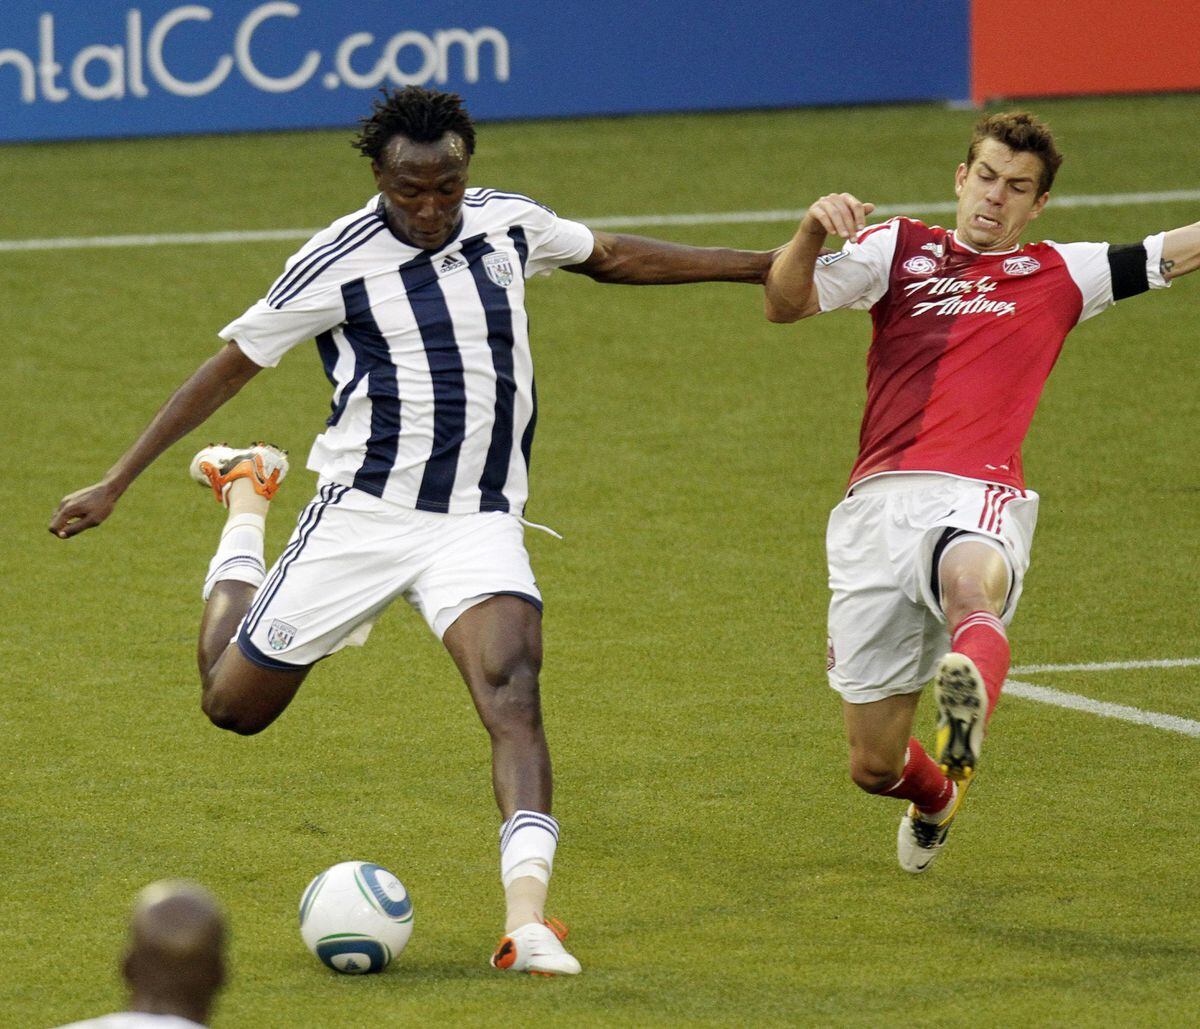 West Bromwich Albion midfielder Somen Tchoyi, left, takes a shot as Portland Timbers defender Eric Brunner defends during the first half of an exhibition soccer game in Portland, Ore., Wednesday, July 20, 2011.(AP Photo/Don Ryan)